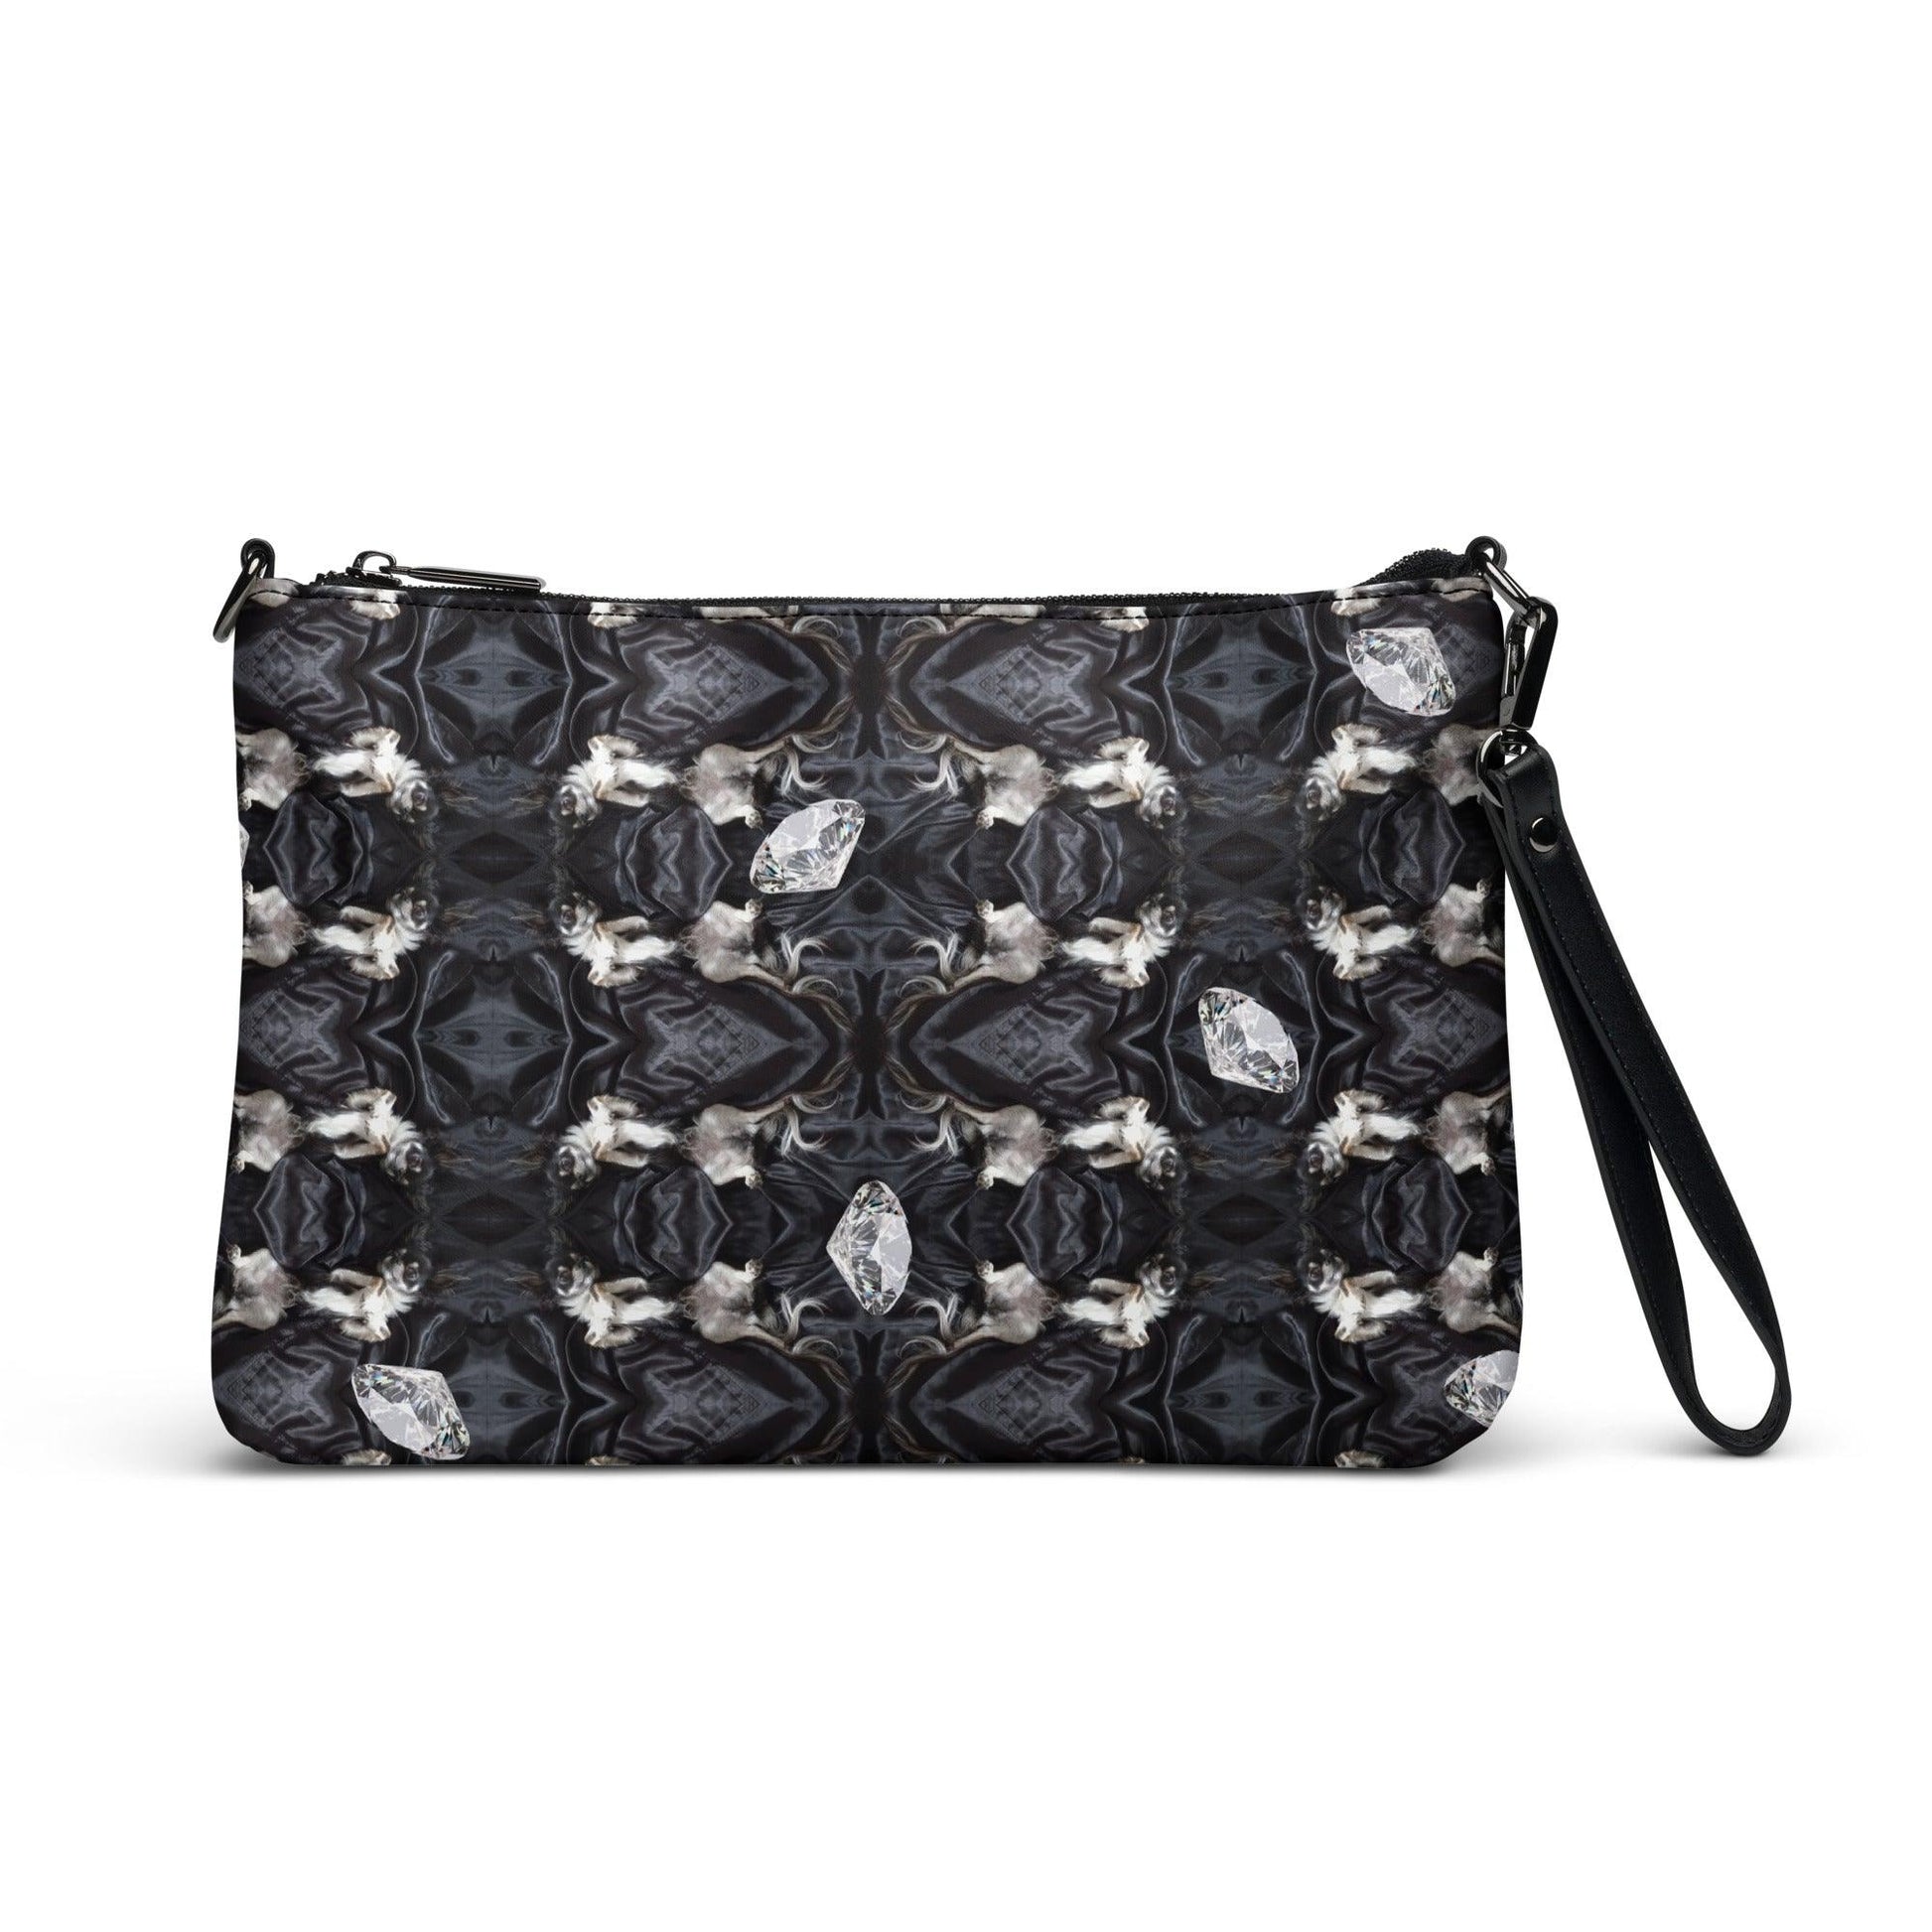 This unique crossbody handbag features a stylish black and white Art Deco pattern with a contemporary bling twist. A gorgeous longhaired chihuahua boy posing seductively on a black silk sheet. On repeat. And scatterings of diamonds! Luxurious. Divine! A brilliant gift for anyone who loves chihuahuas. Design by Renate Kriegler for Chimigos.